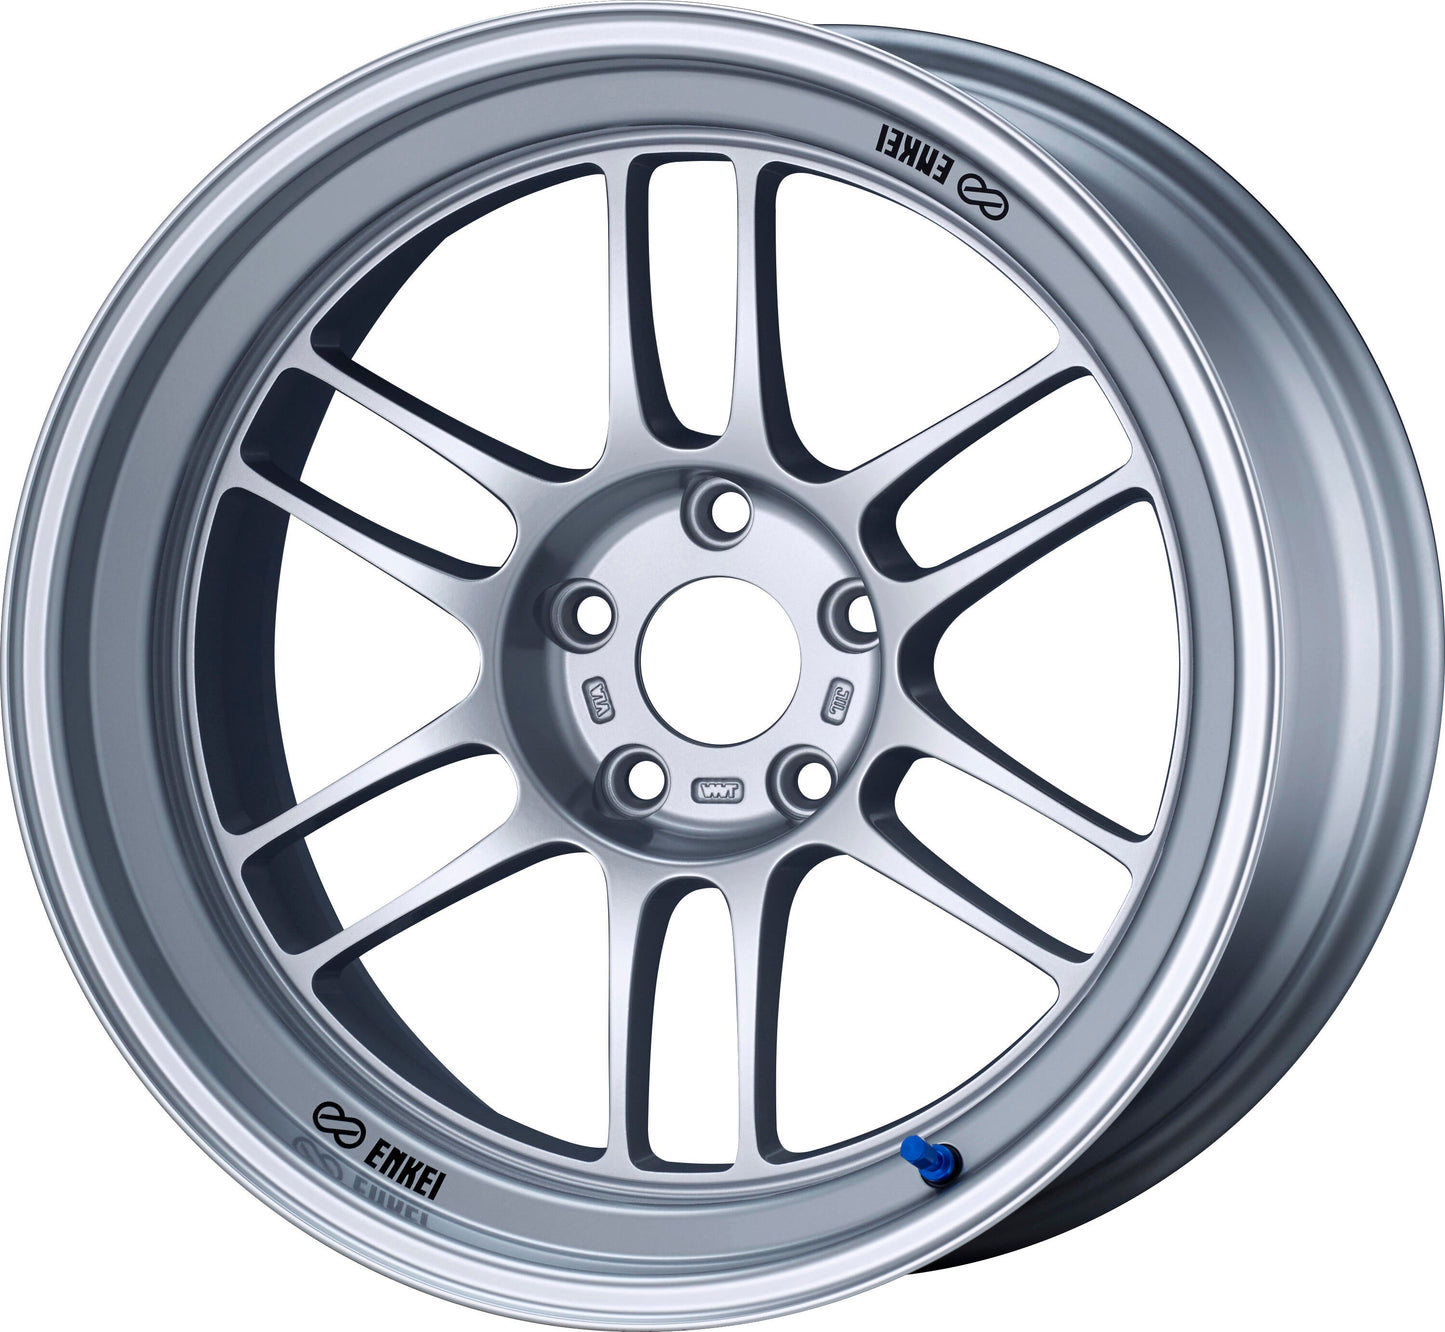 ENKEI RPF1 RS SILVER 18x9.5 +12 | 18x10.5 +10 5-114.3 STAGGERED ***PRE-ORDER ARRIVAL END OF FEBRUARY***